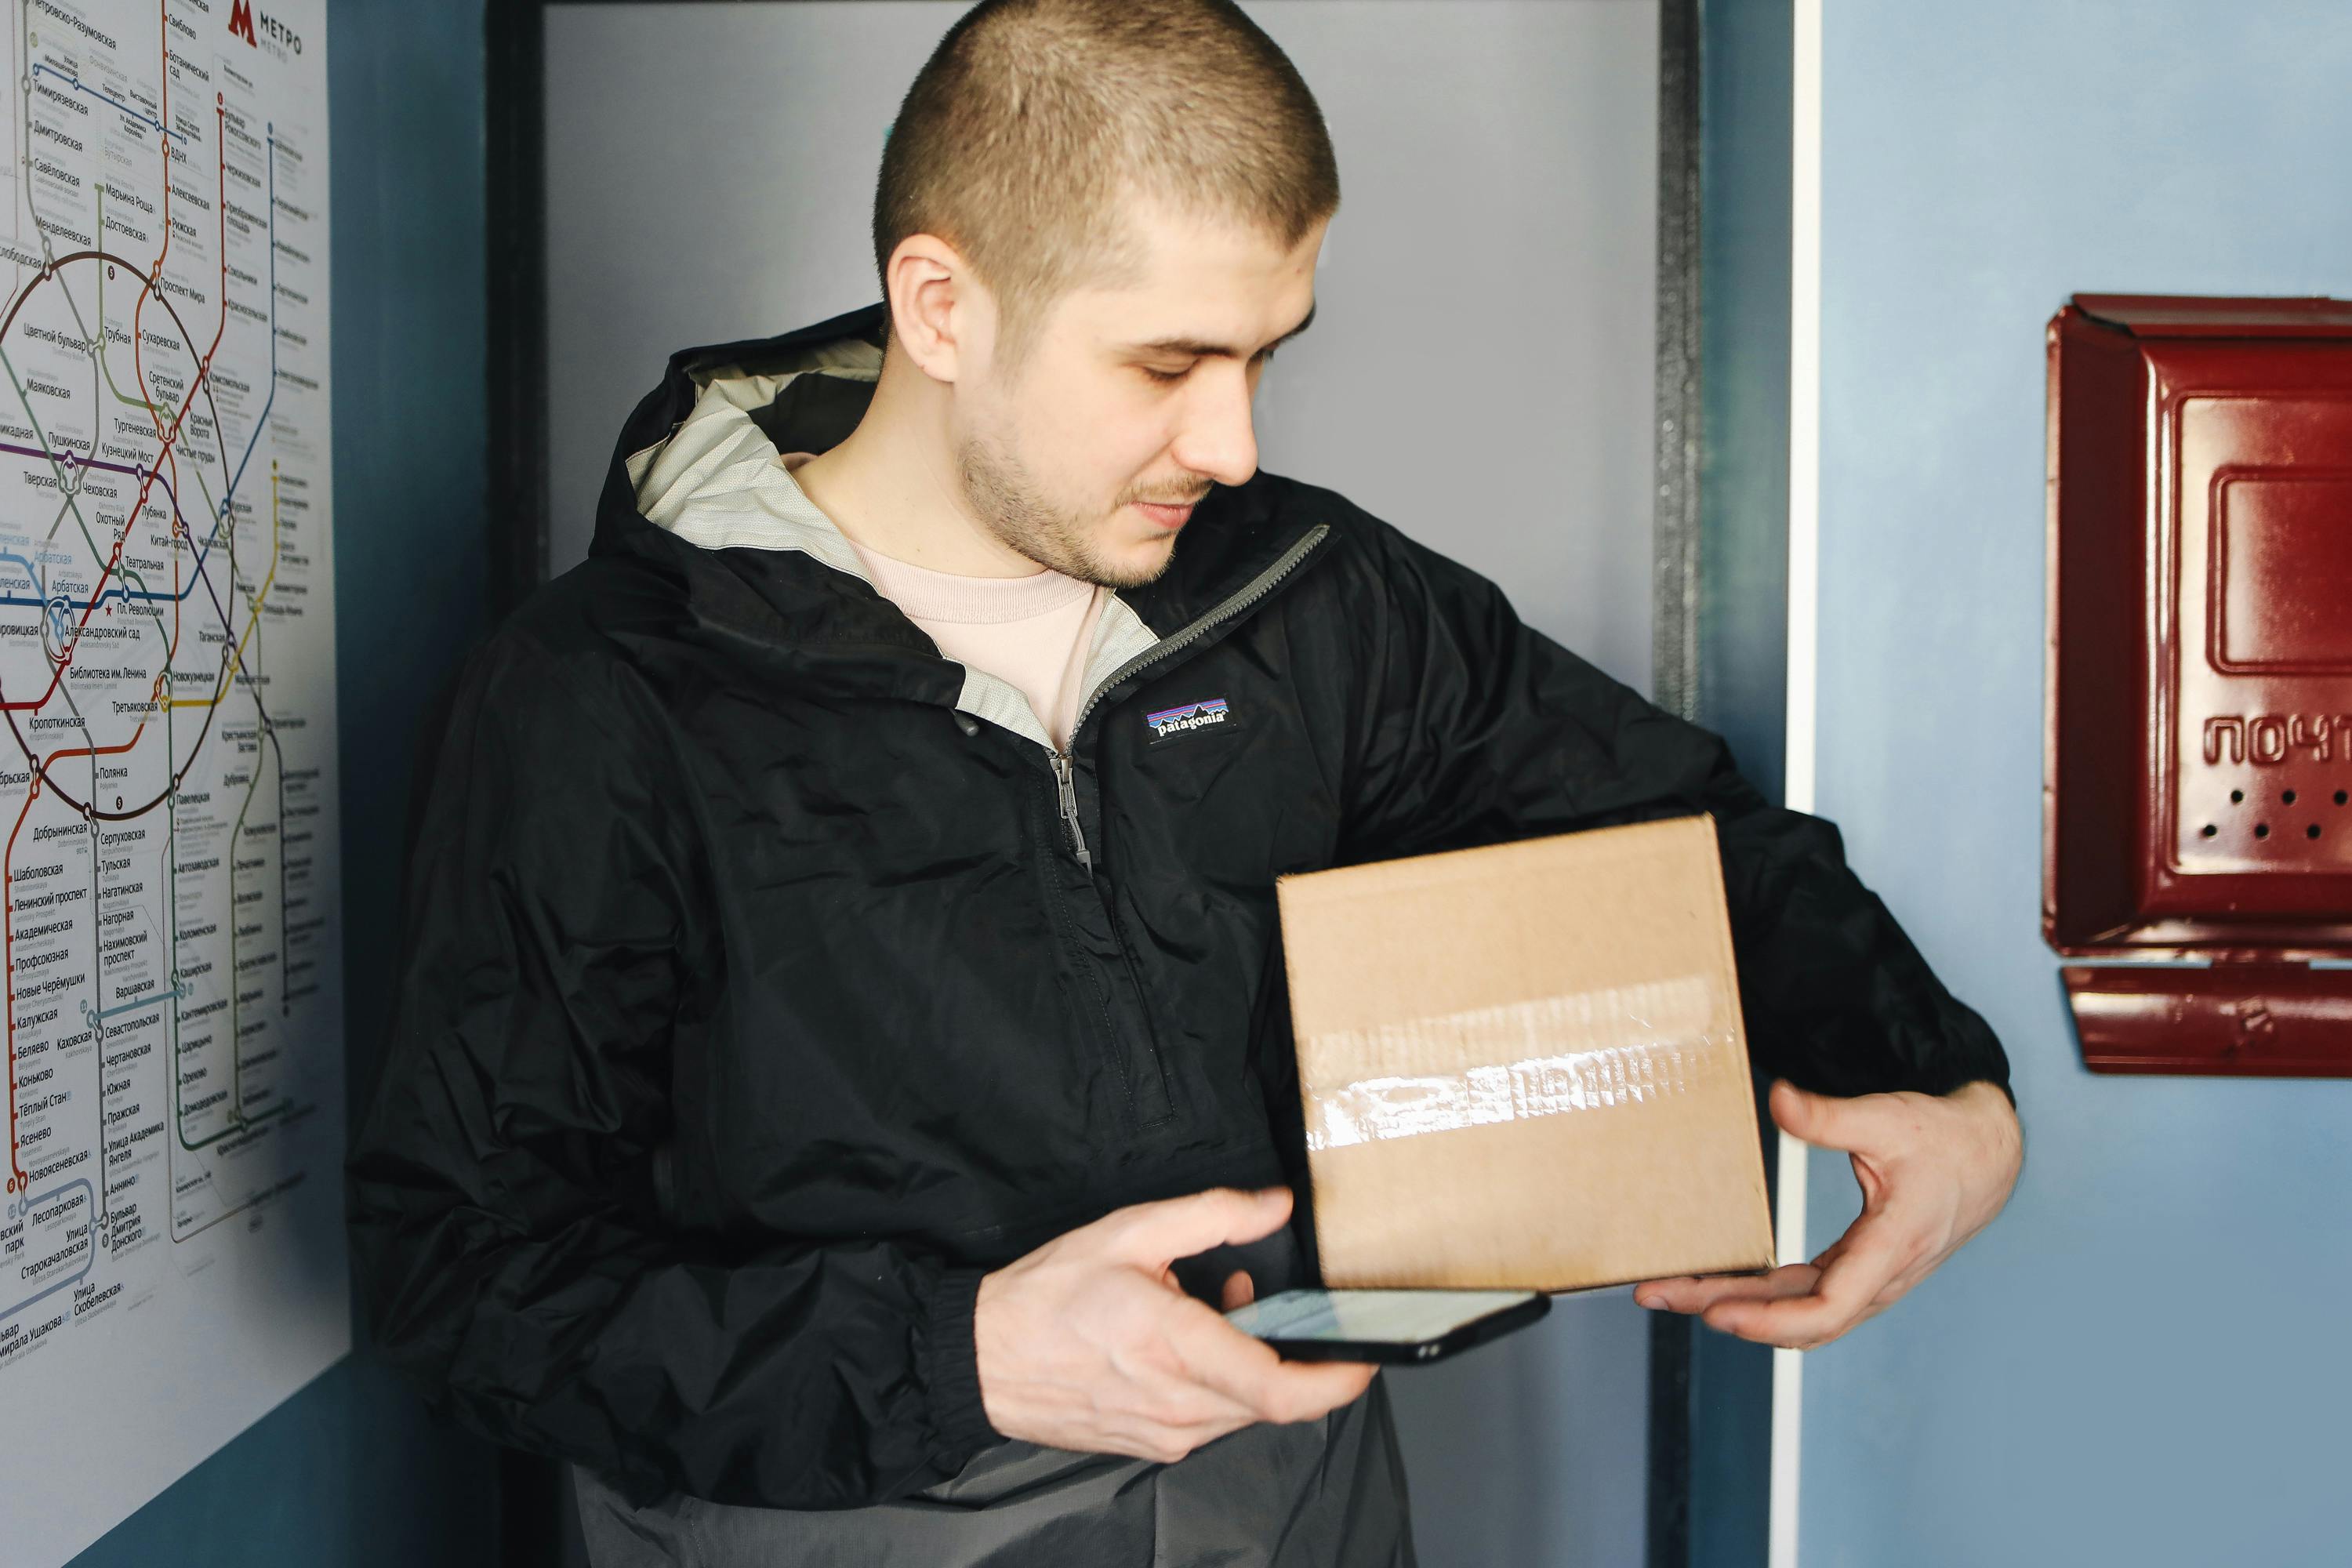 Delivery man holding a cardboard box | Source: Pexels